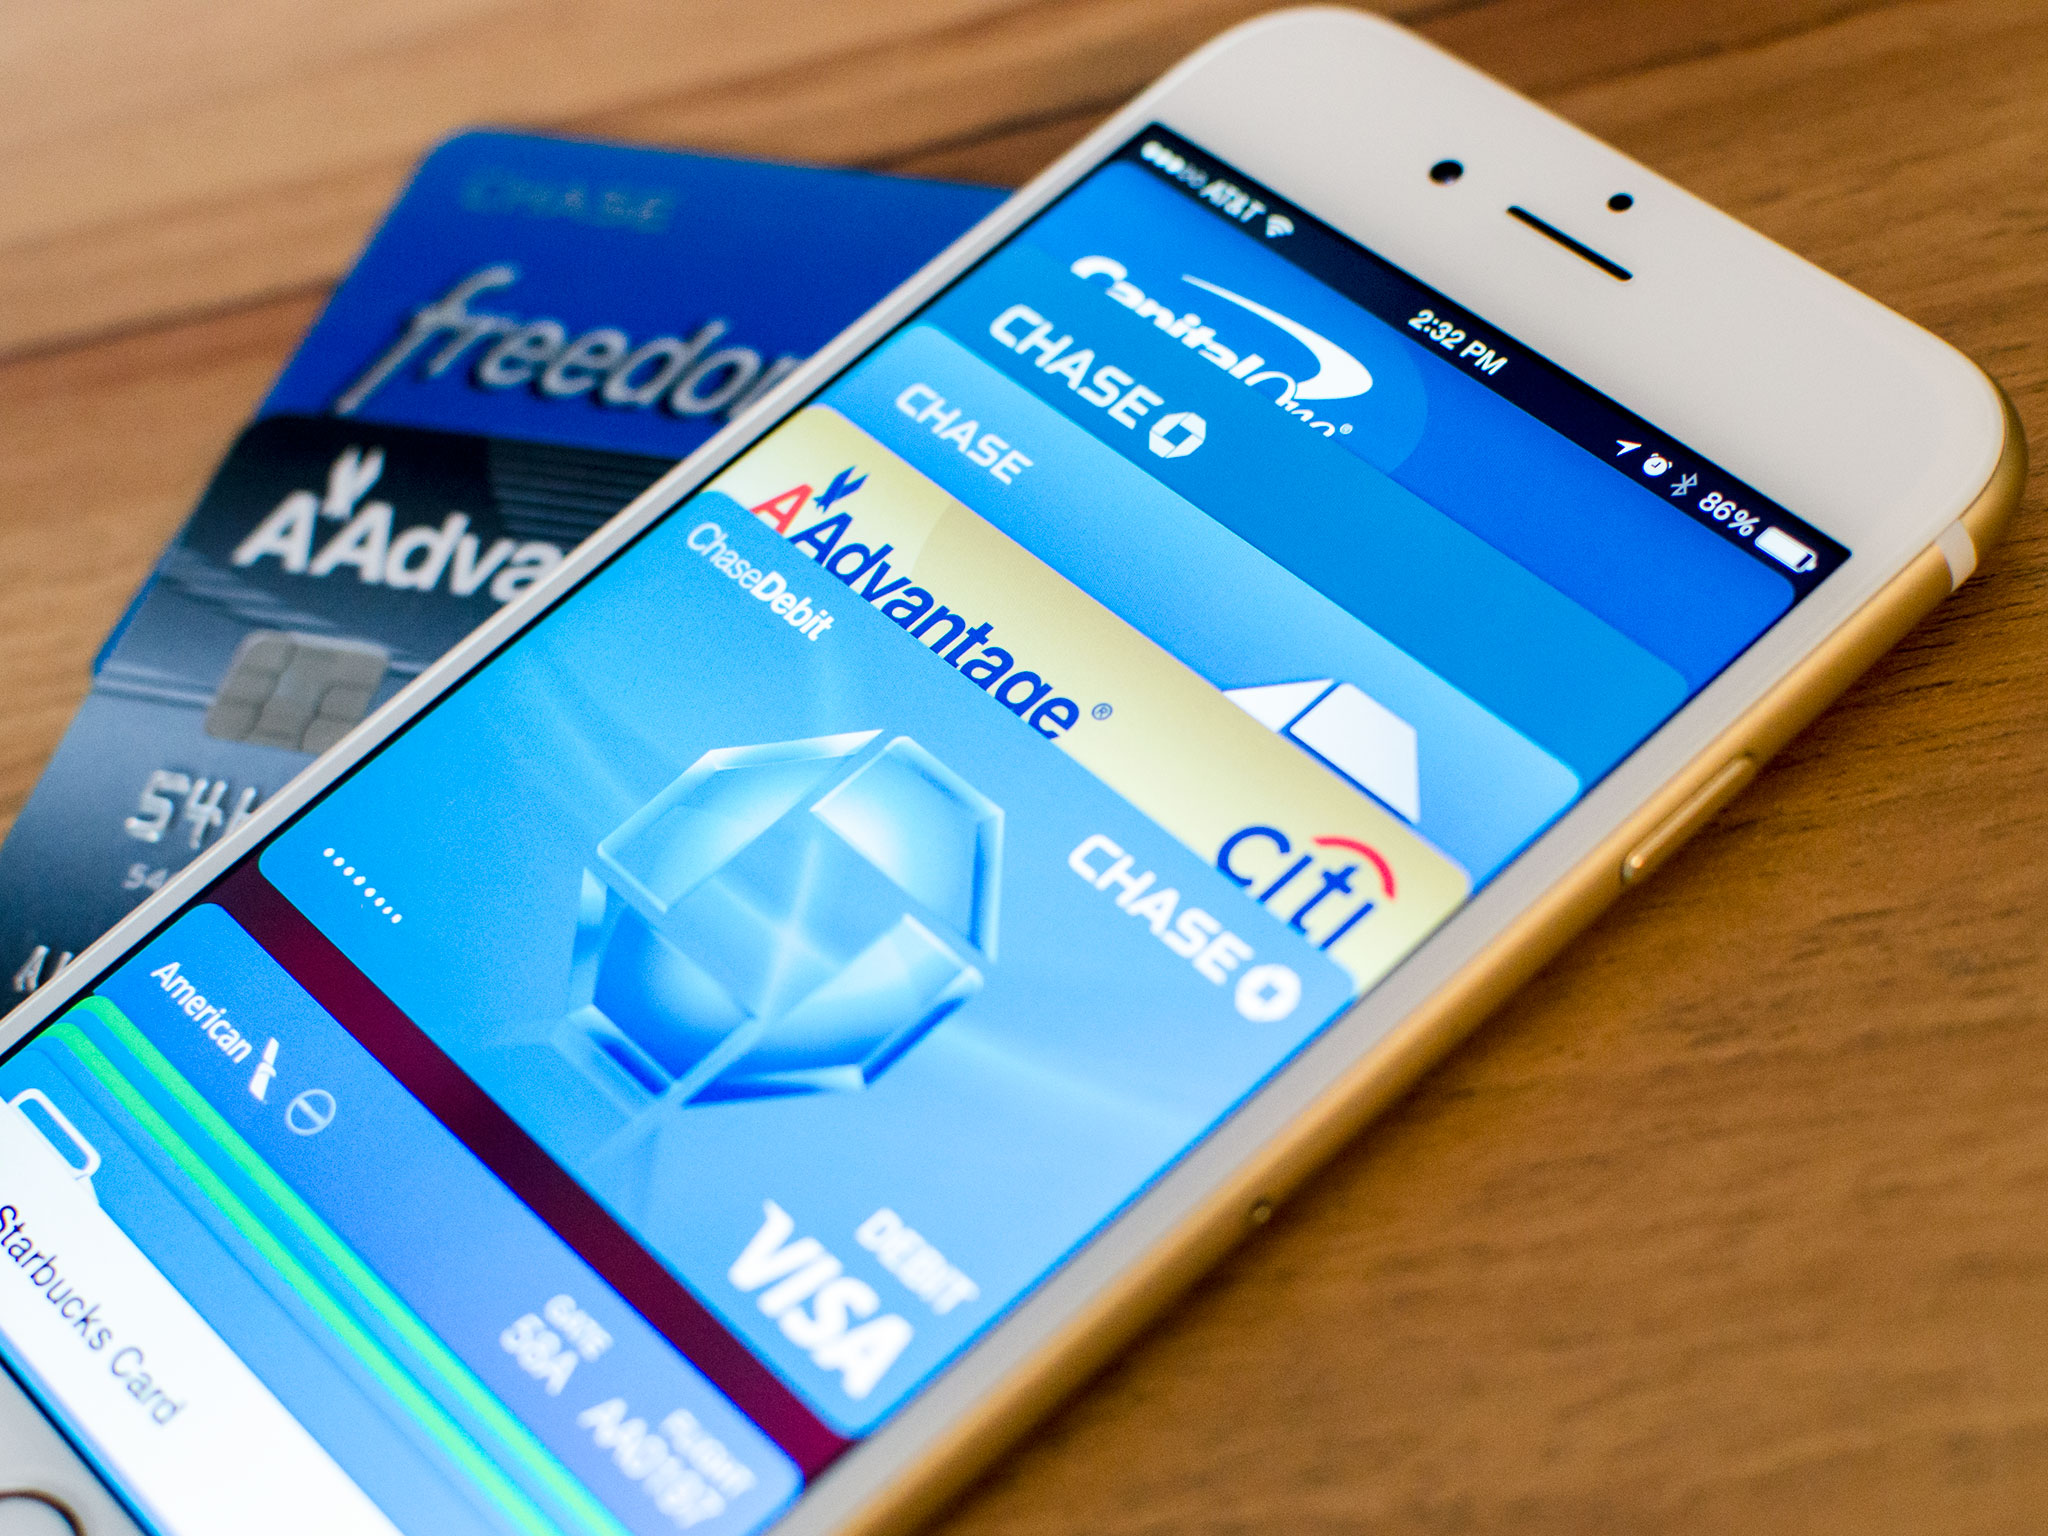 Apple responds to Apple Pay being shut out from CVS, Rite Aid